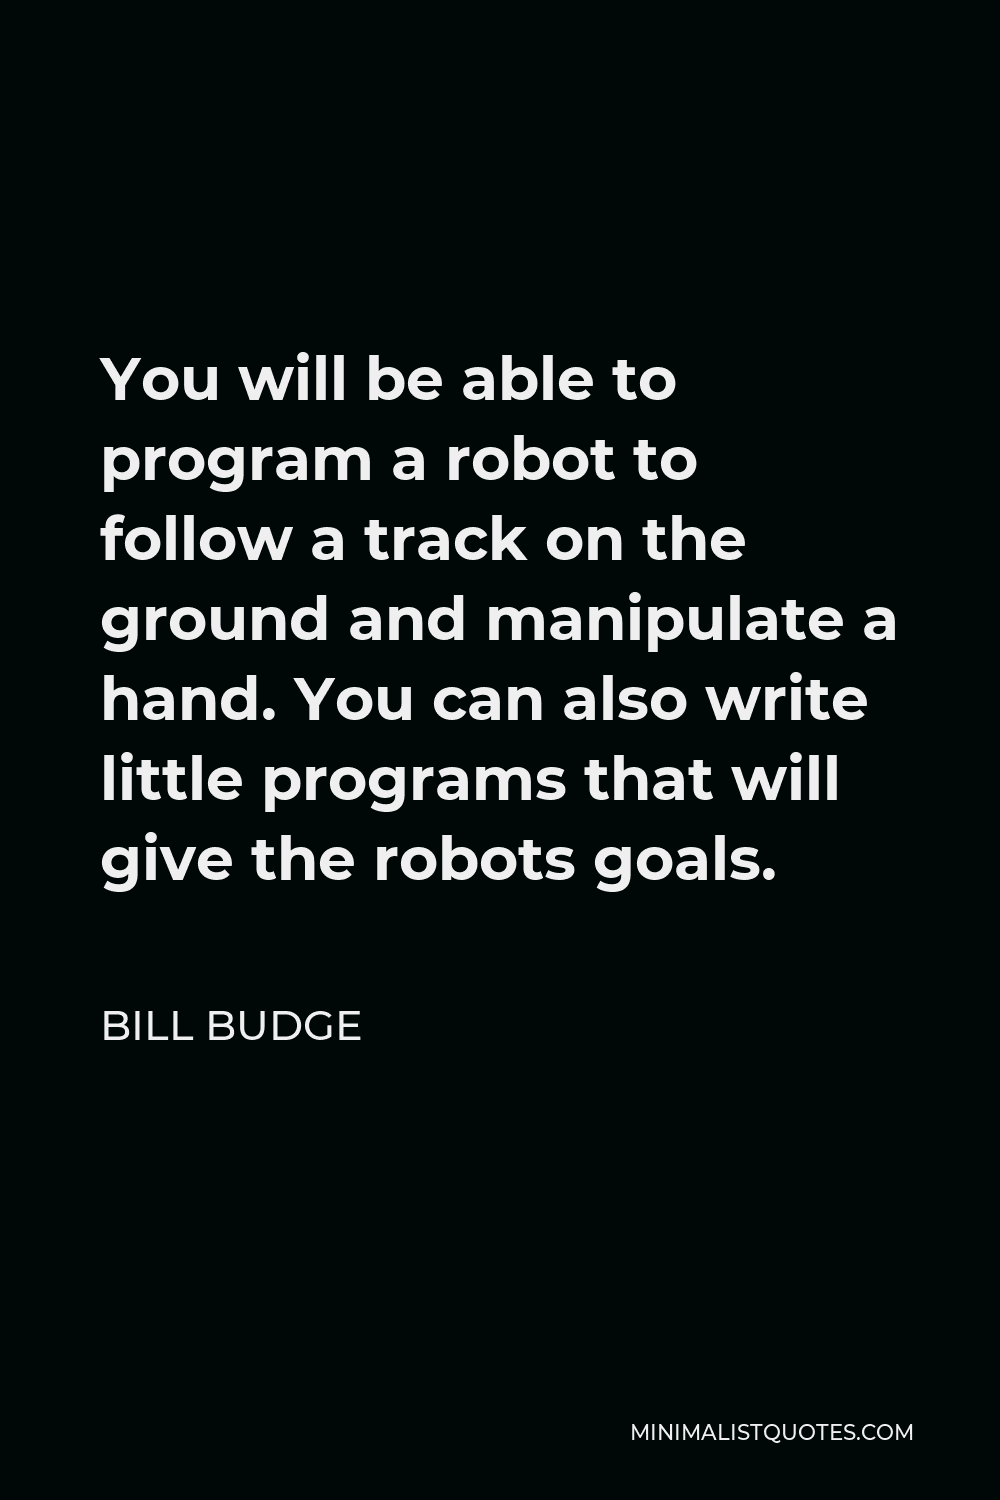 Bill Budge Quote - You will be able to program a robot to follow a track on the ground and manipulate a hand. You can also write little programs that will give the robots goals.